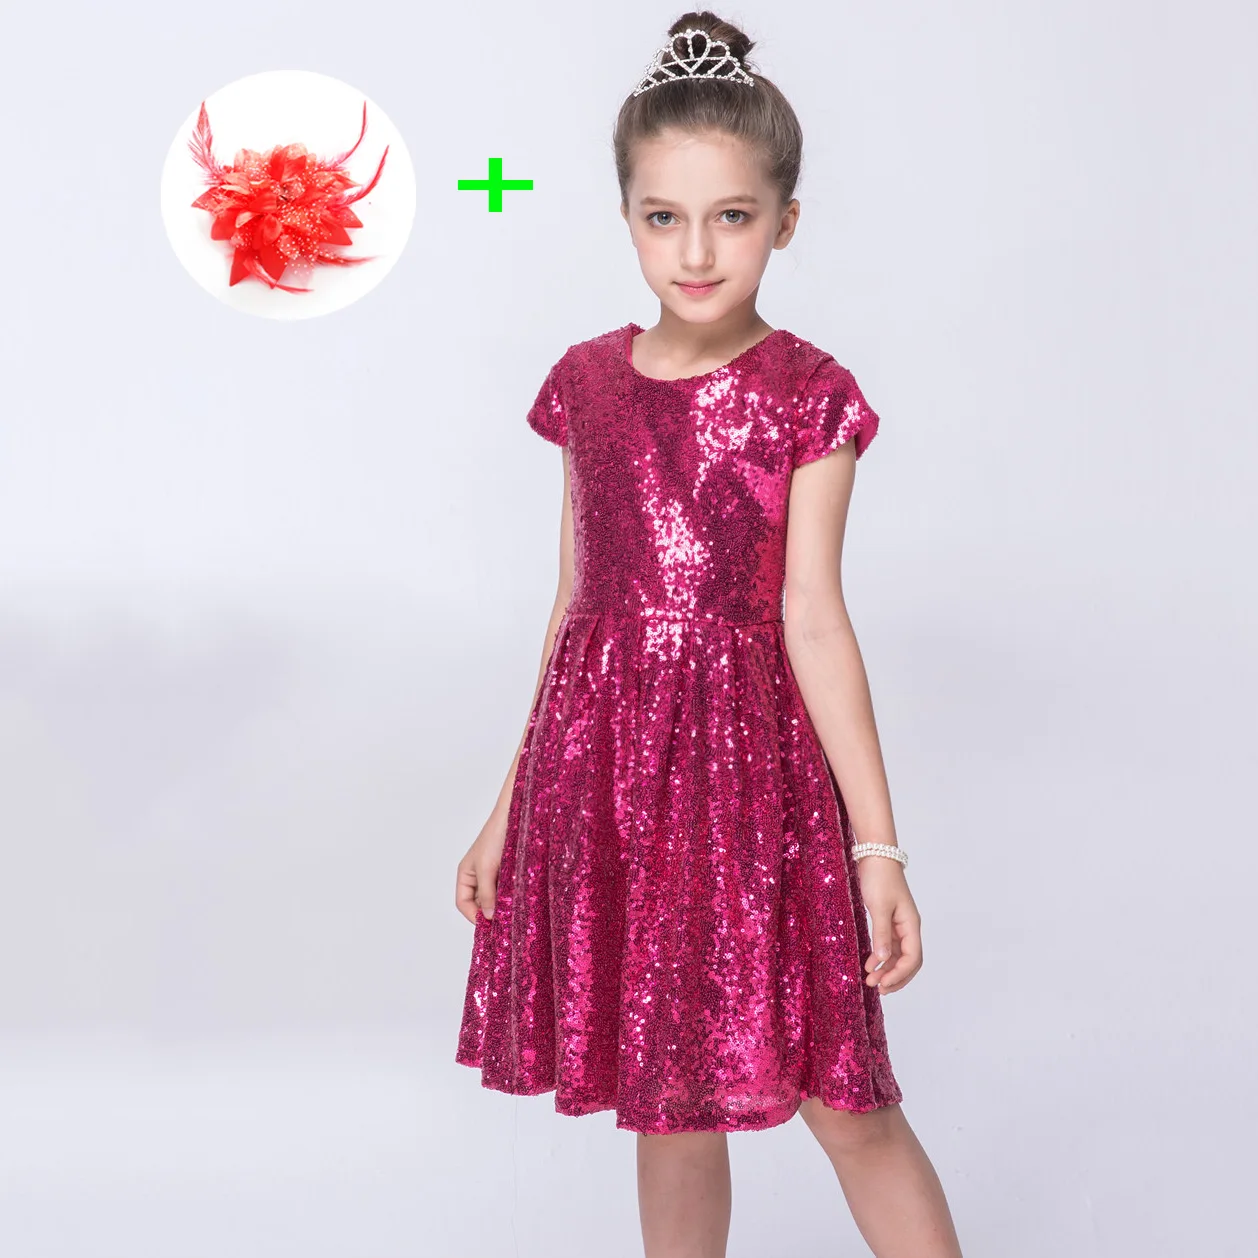 Toddler Girl gorgeous pink sequins layered party dress size 1,2 formal occasion 